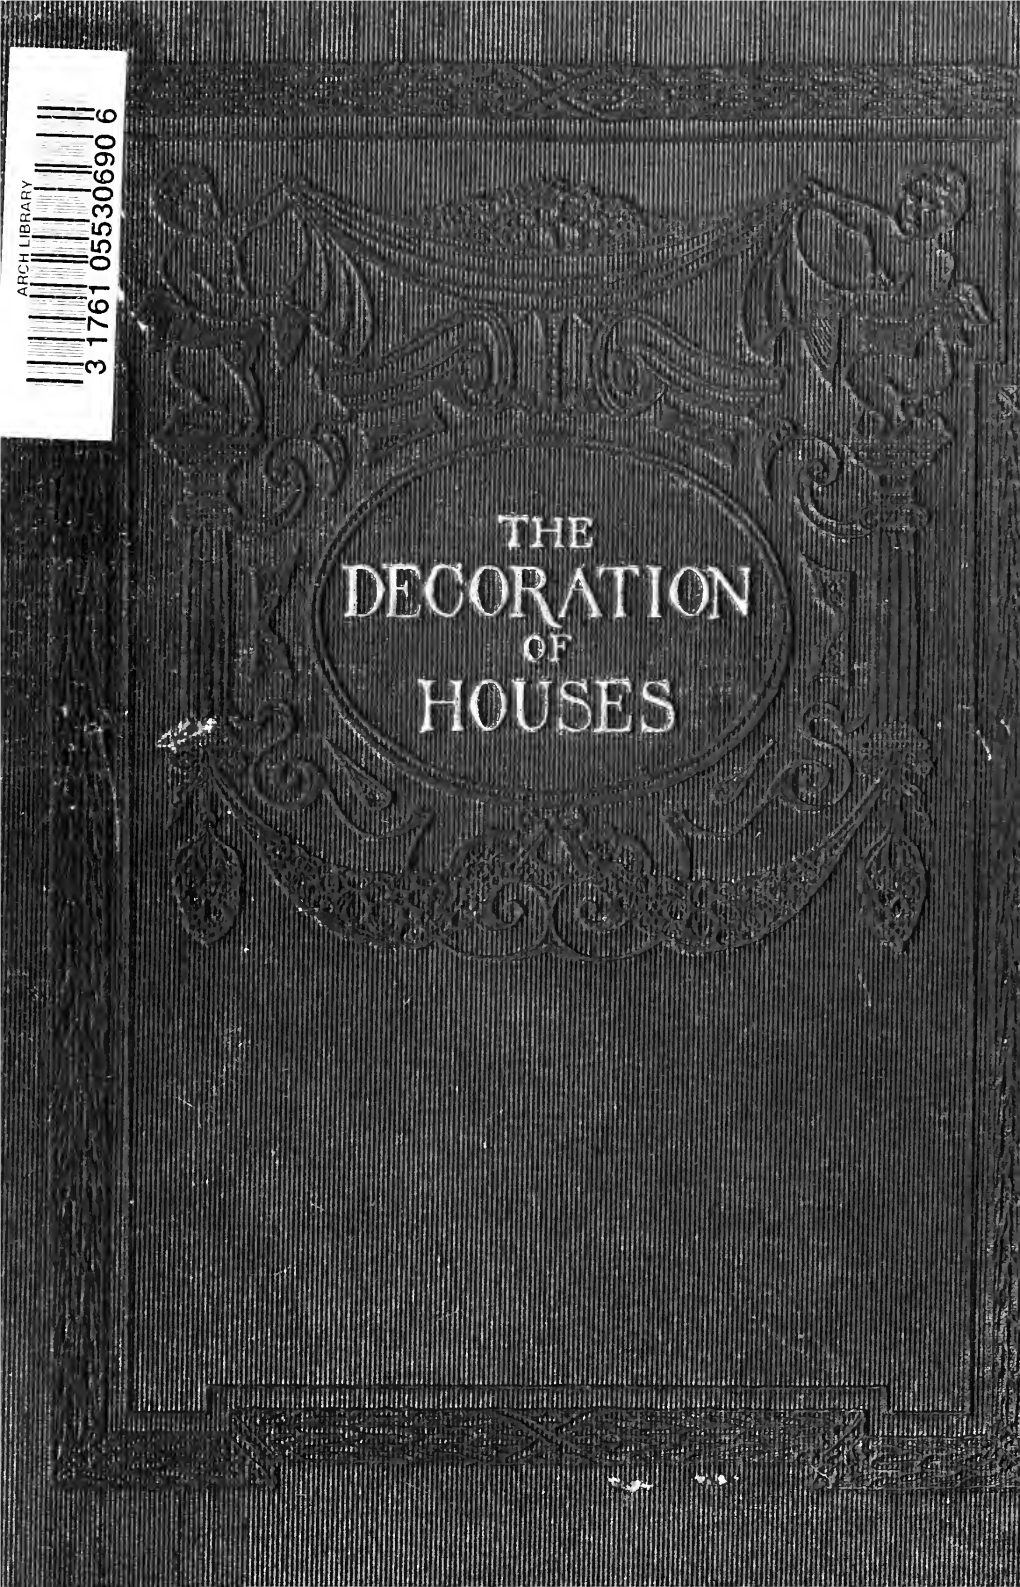 THE DECORATION of HOUSES Digitized by the Internet Archive